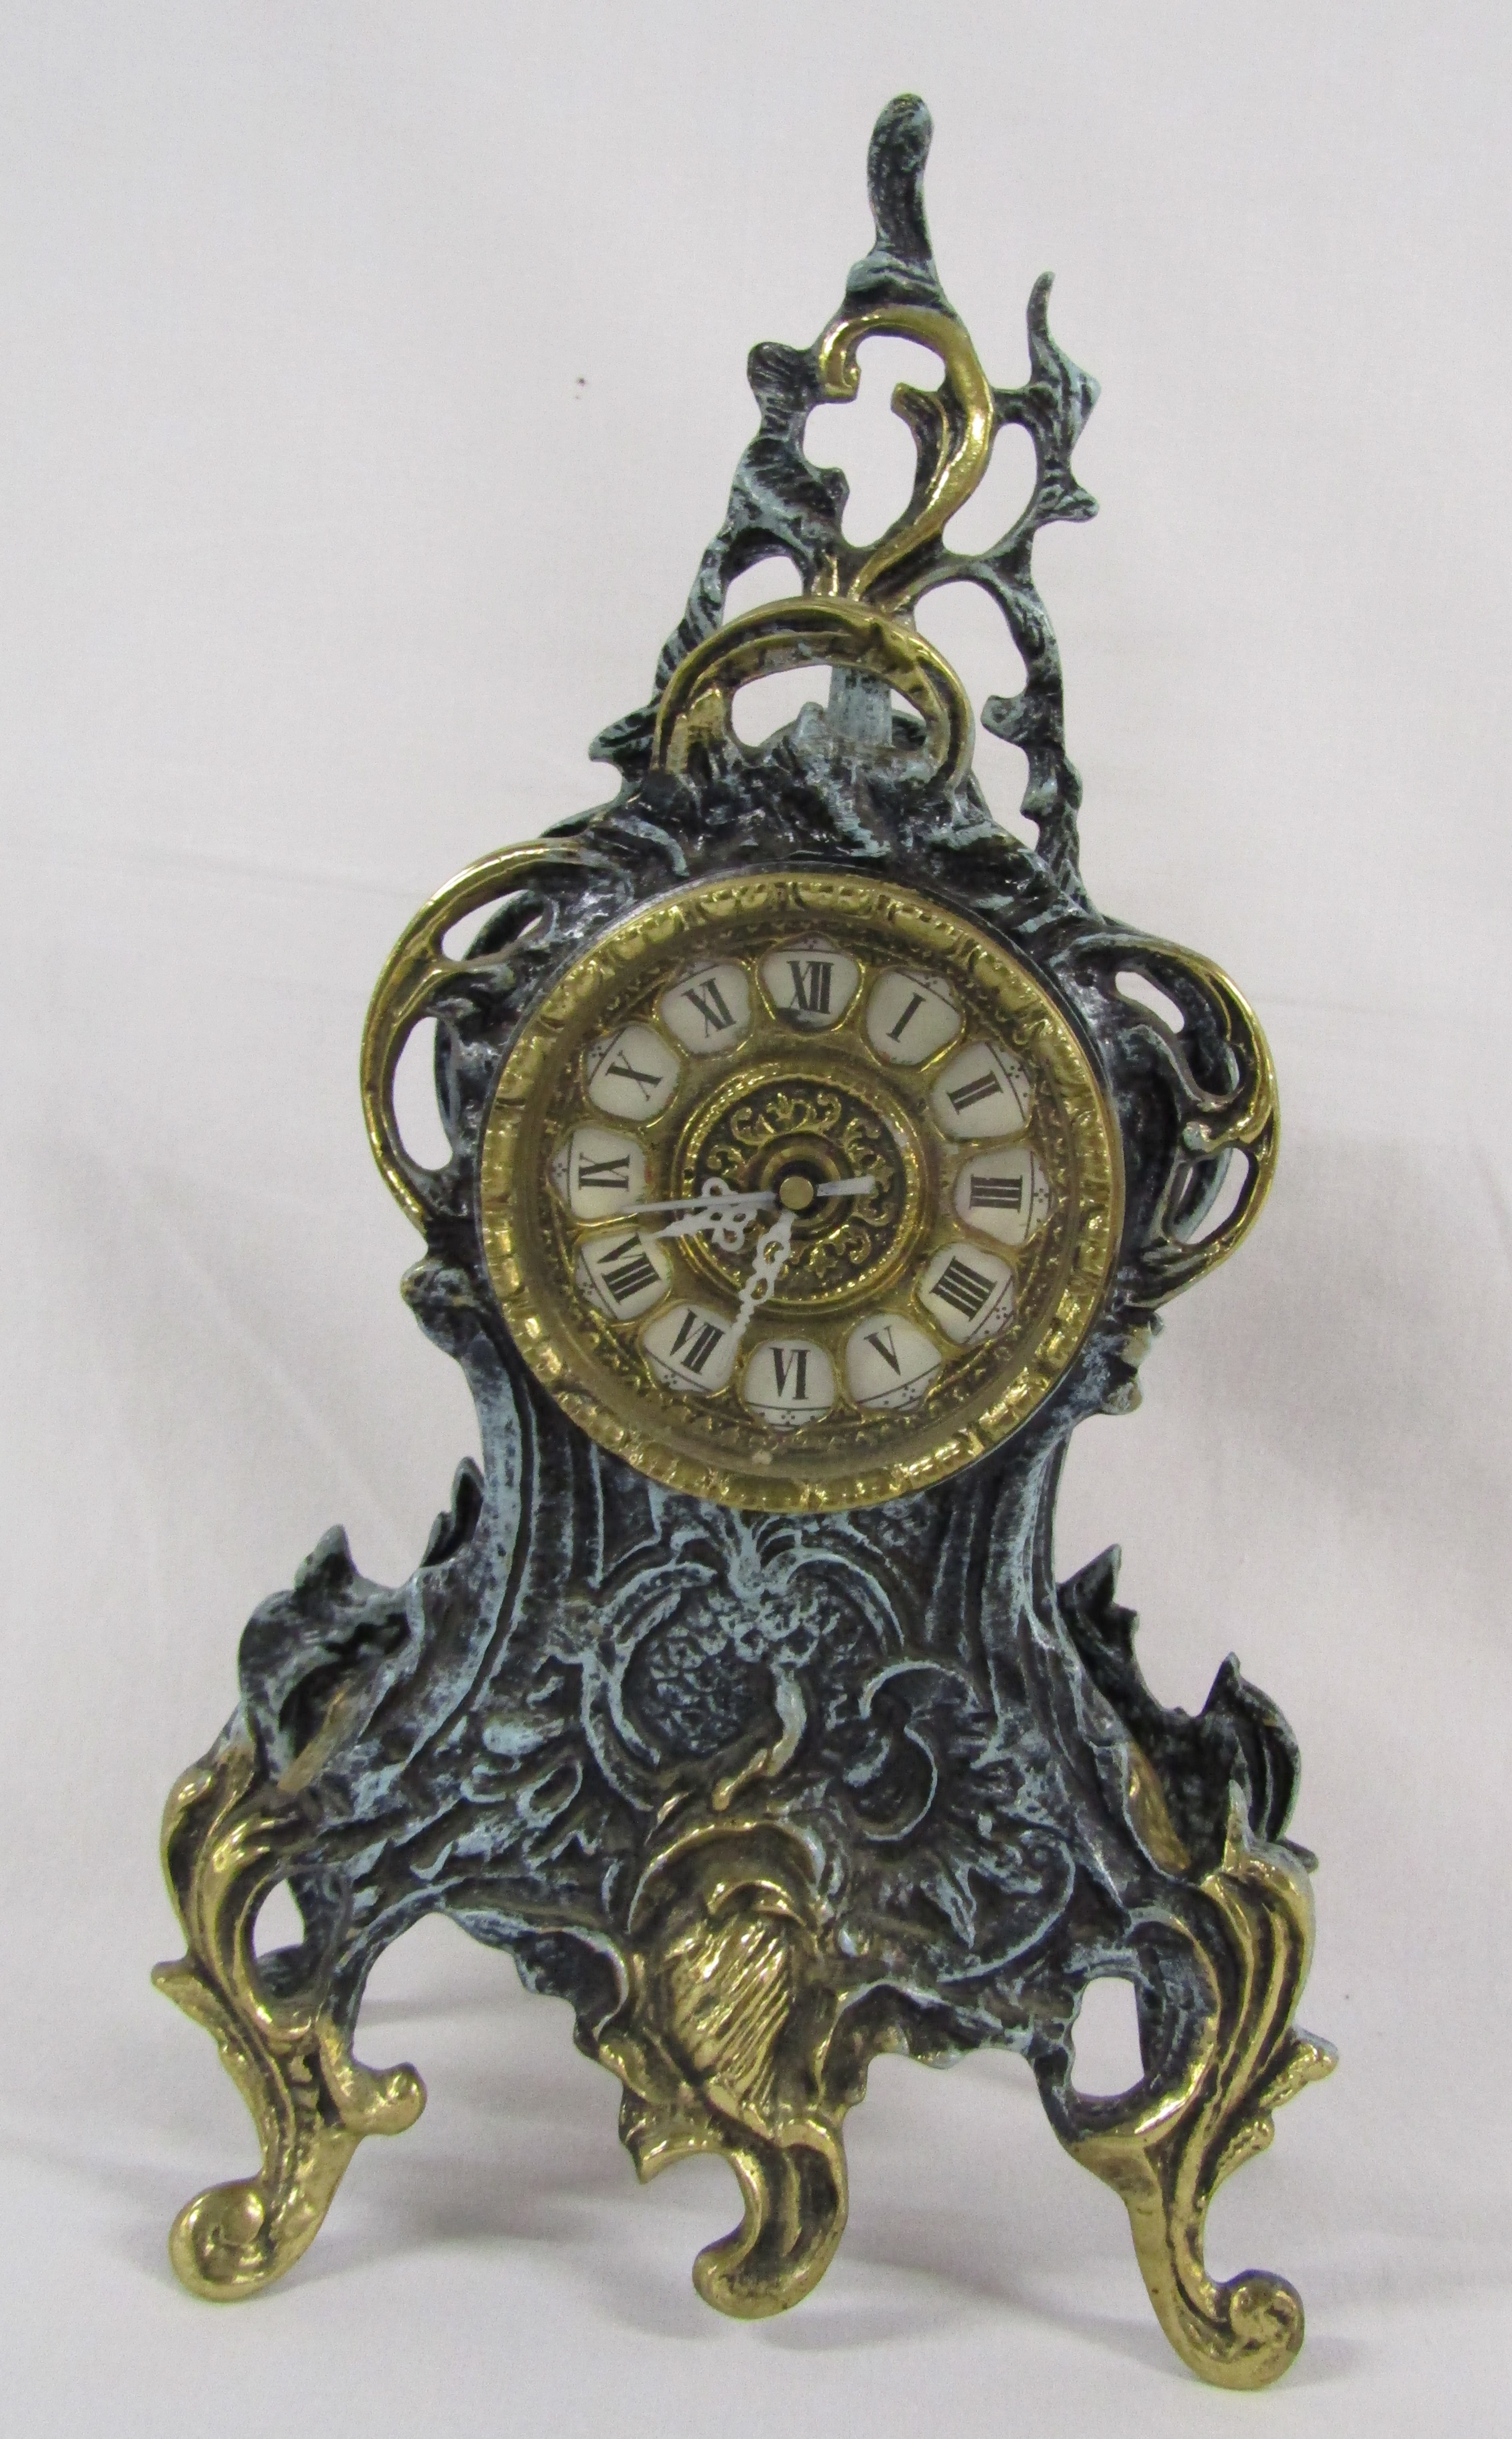 Ornate brass and green mantel clock - battery operated - approx. 34cm tall